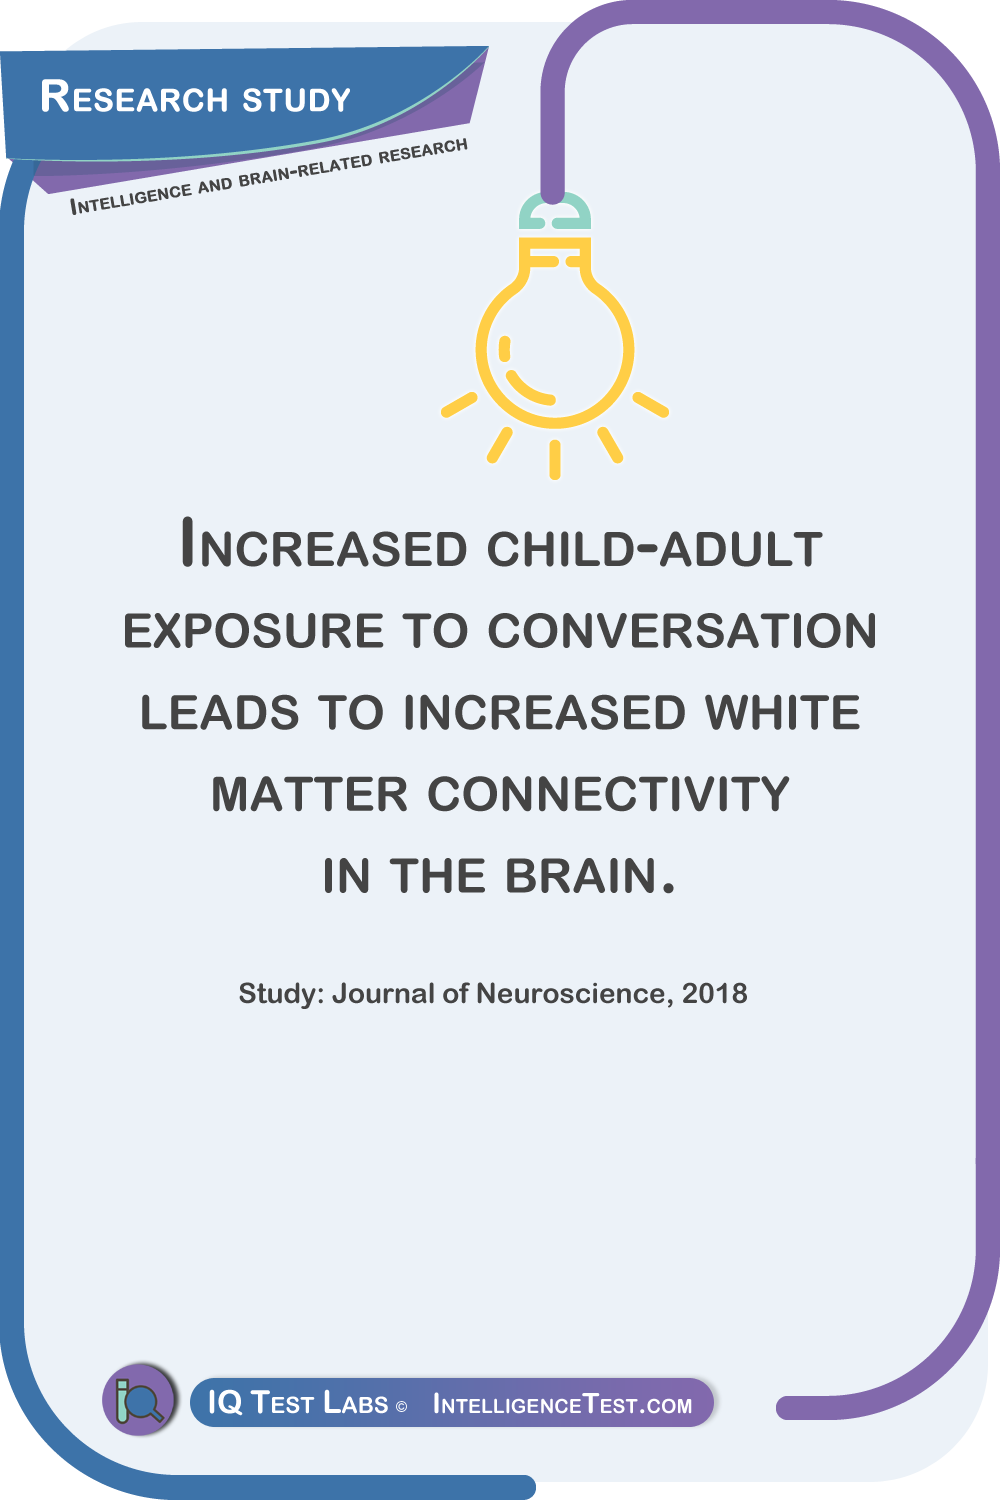 Increased child-adult exposure to conversation leads to increased white matter connectivity in the brain. Study: Journal of Neuroscience, 2018.